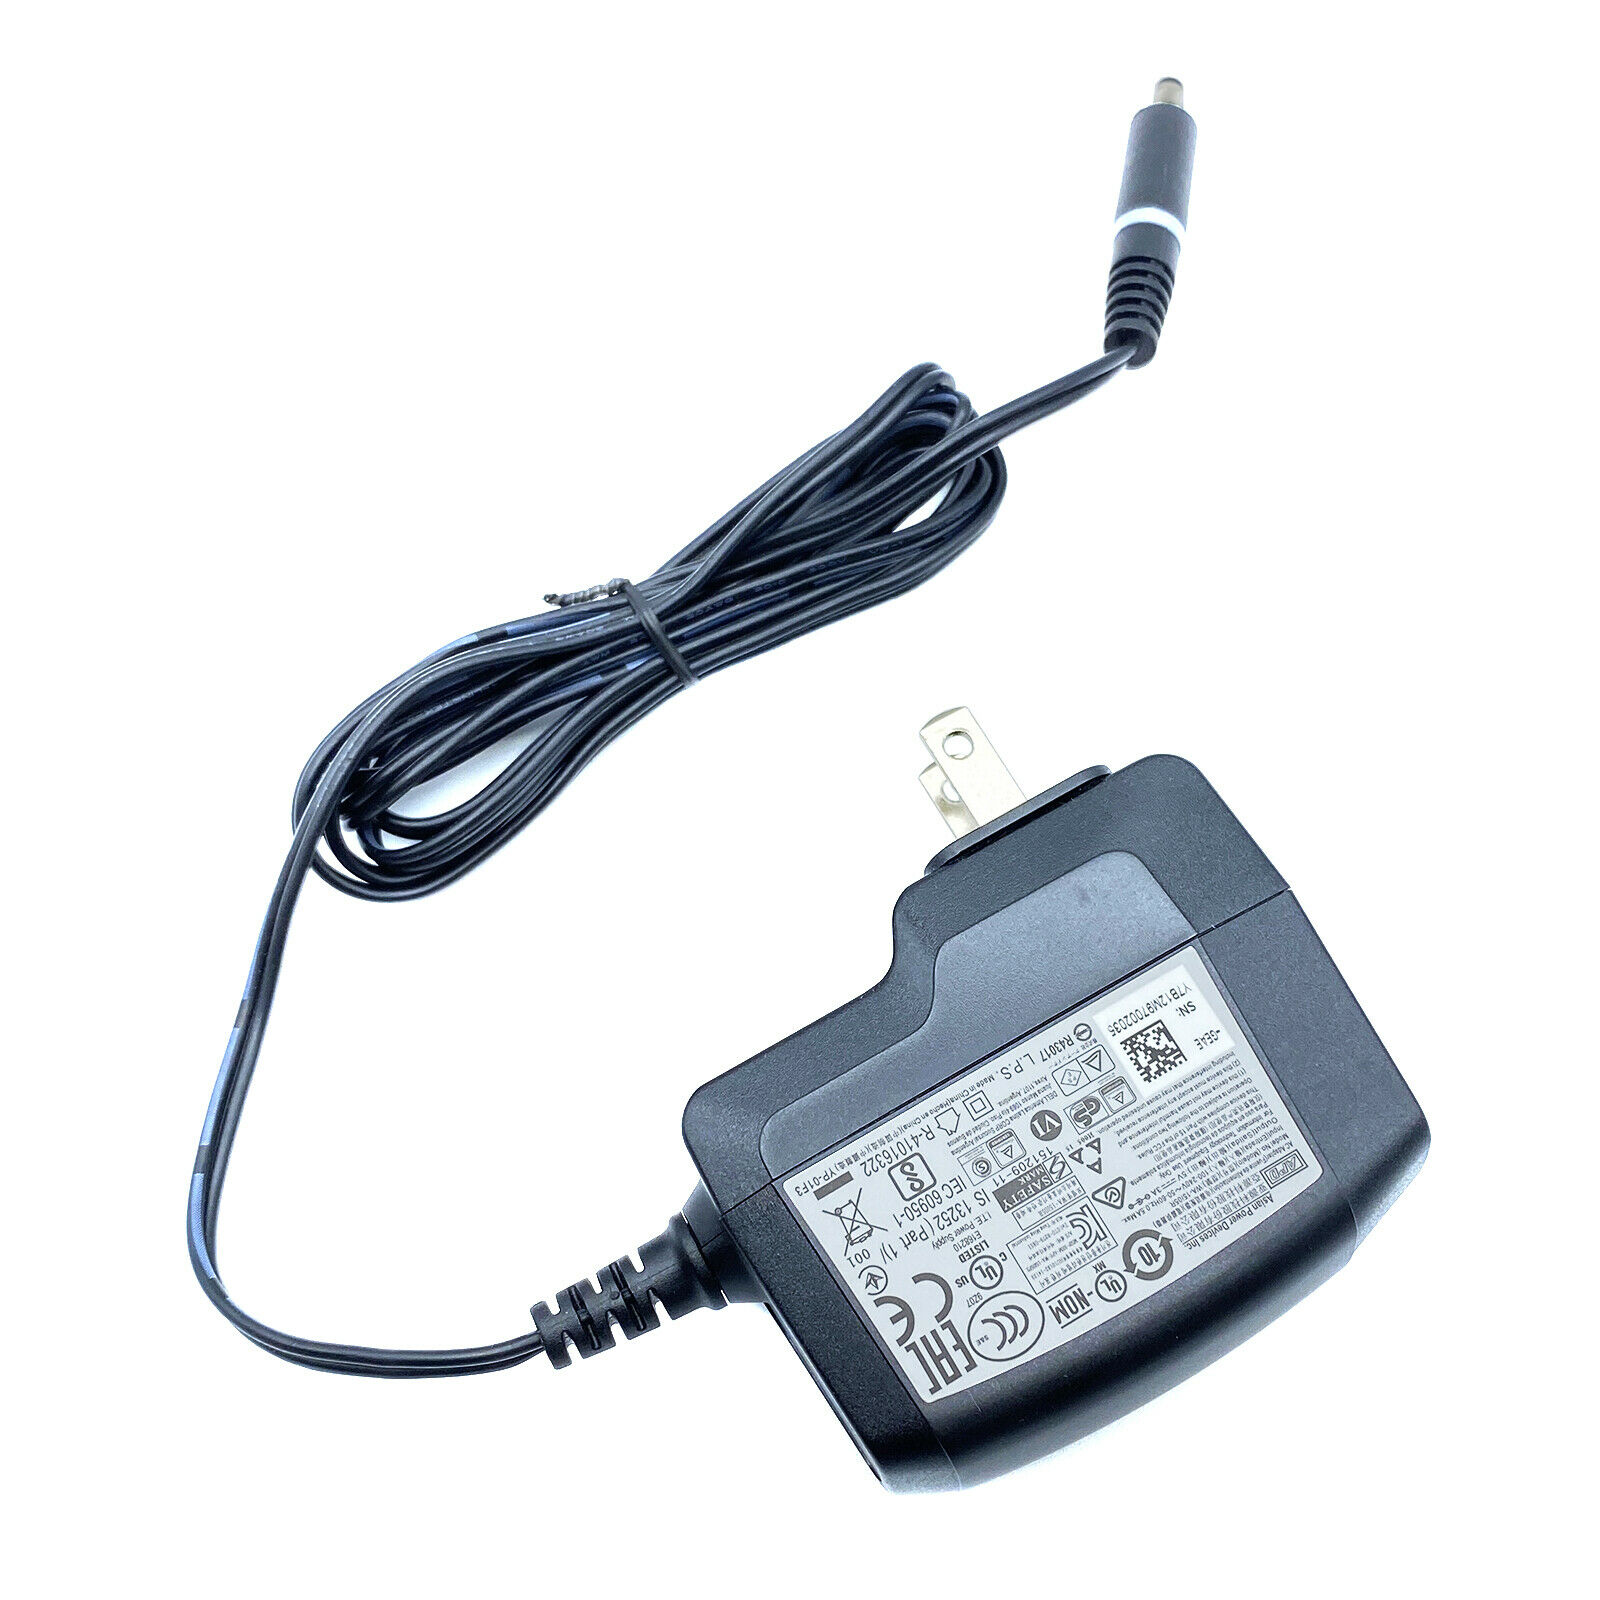 New Authentic APD WA-15I05R AC Power Supply Adapter 5V 3A 15W OEM Cable Length: Not Specified Connection Split/Duplica